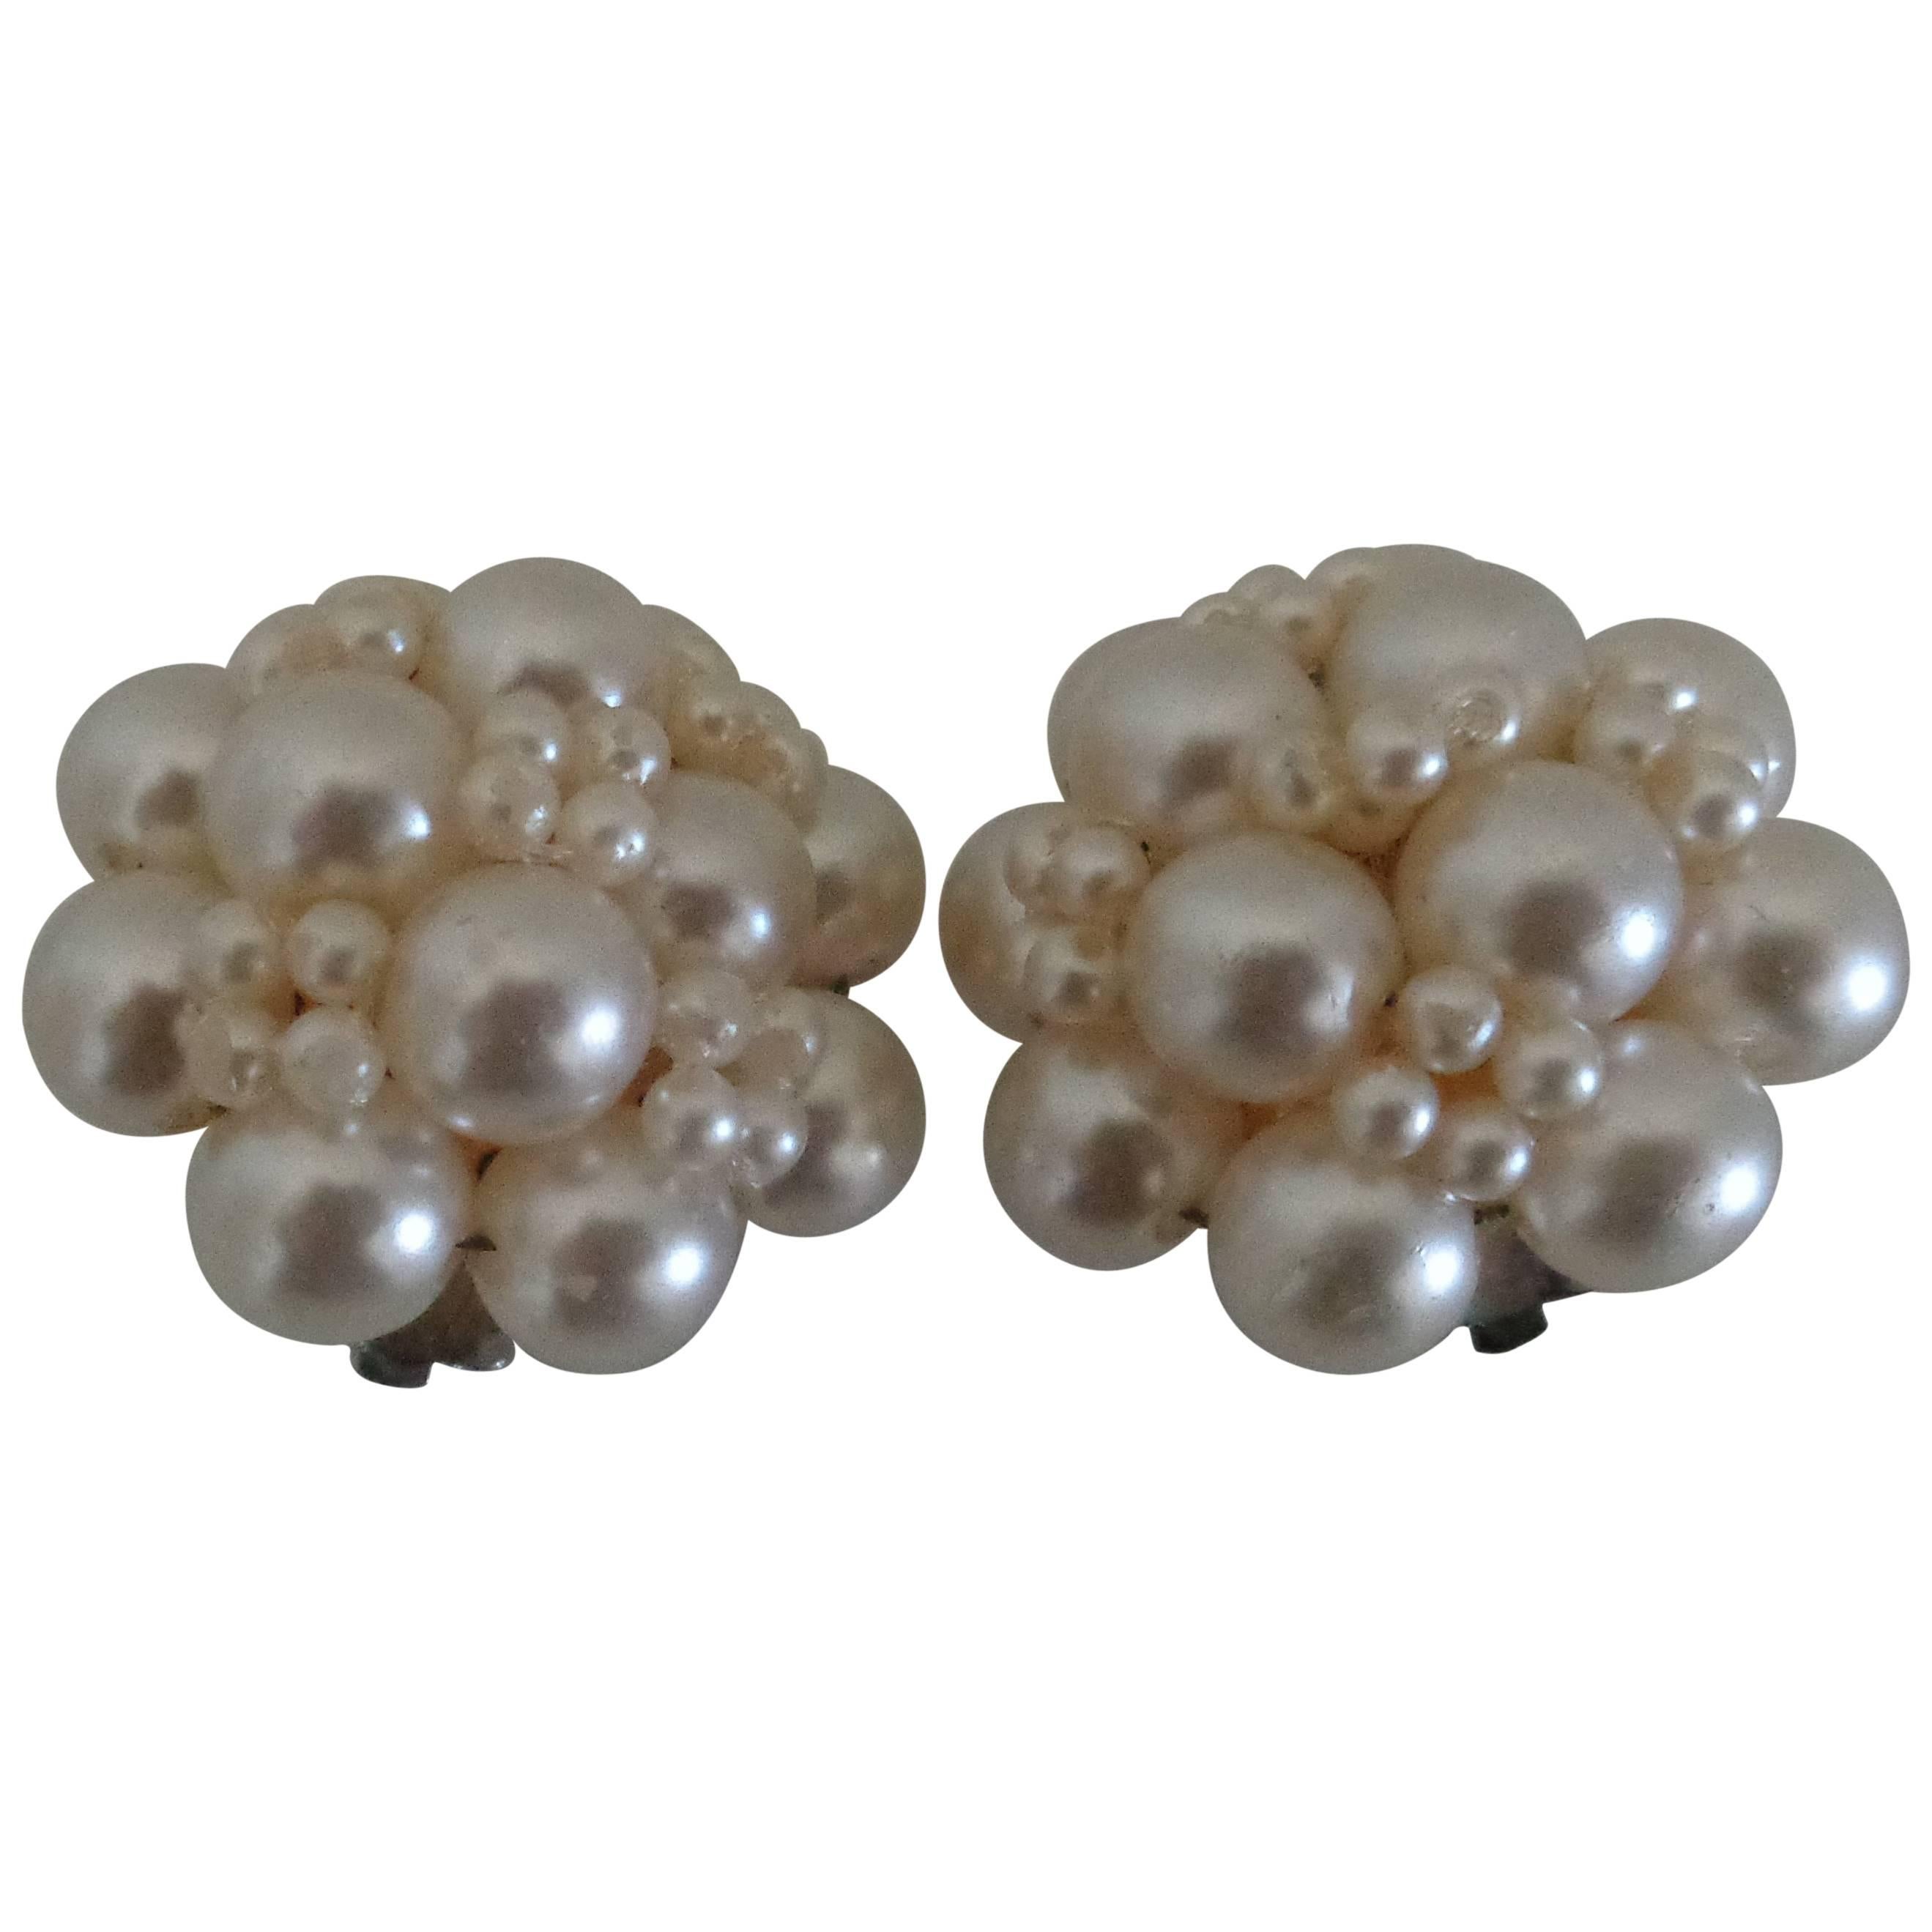 Vintage white faux Pearls Clip on Earrings